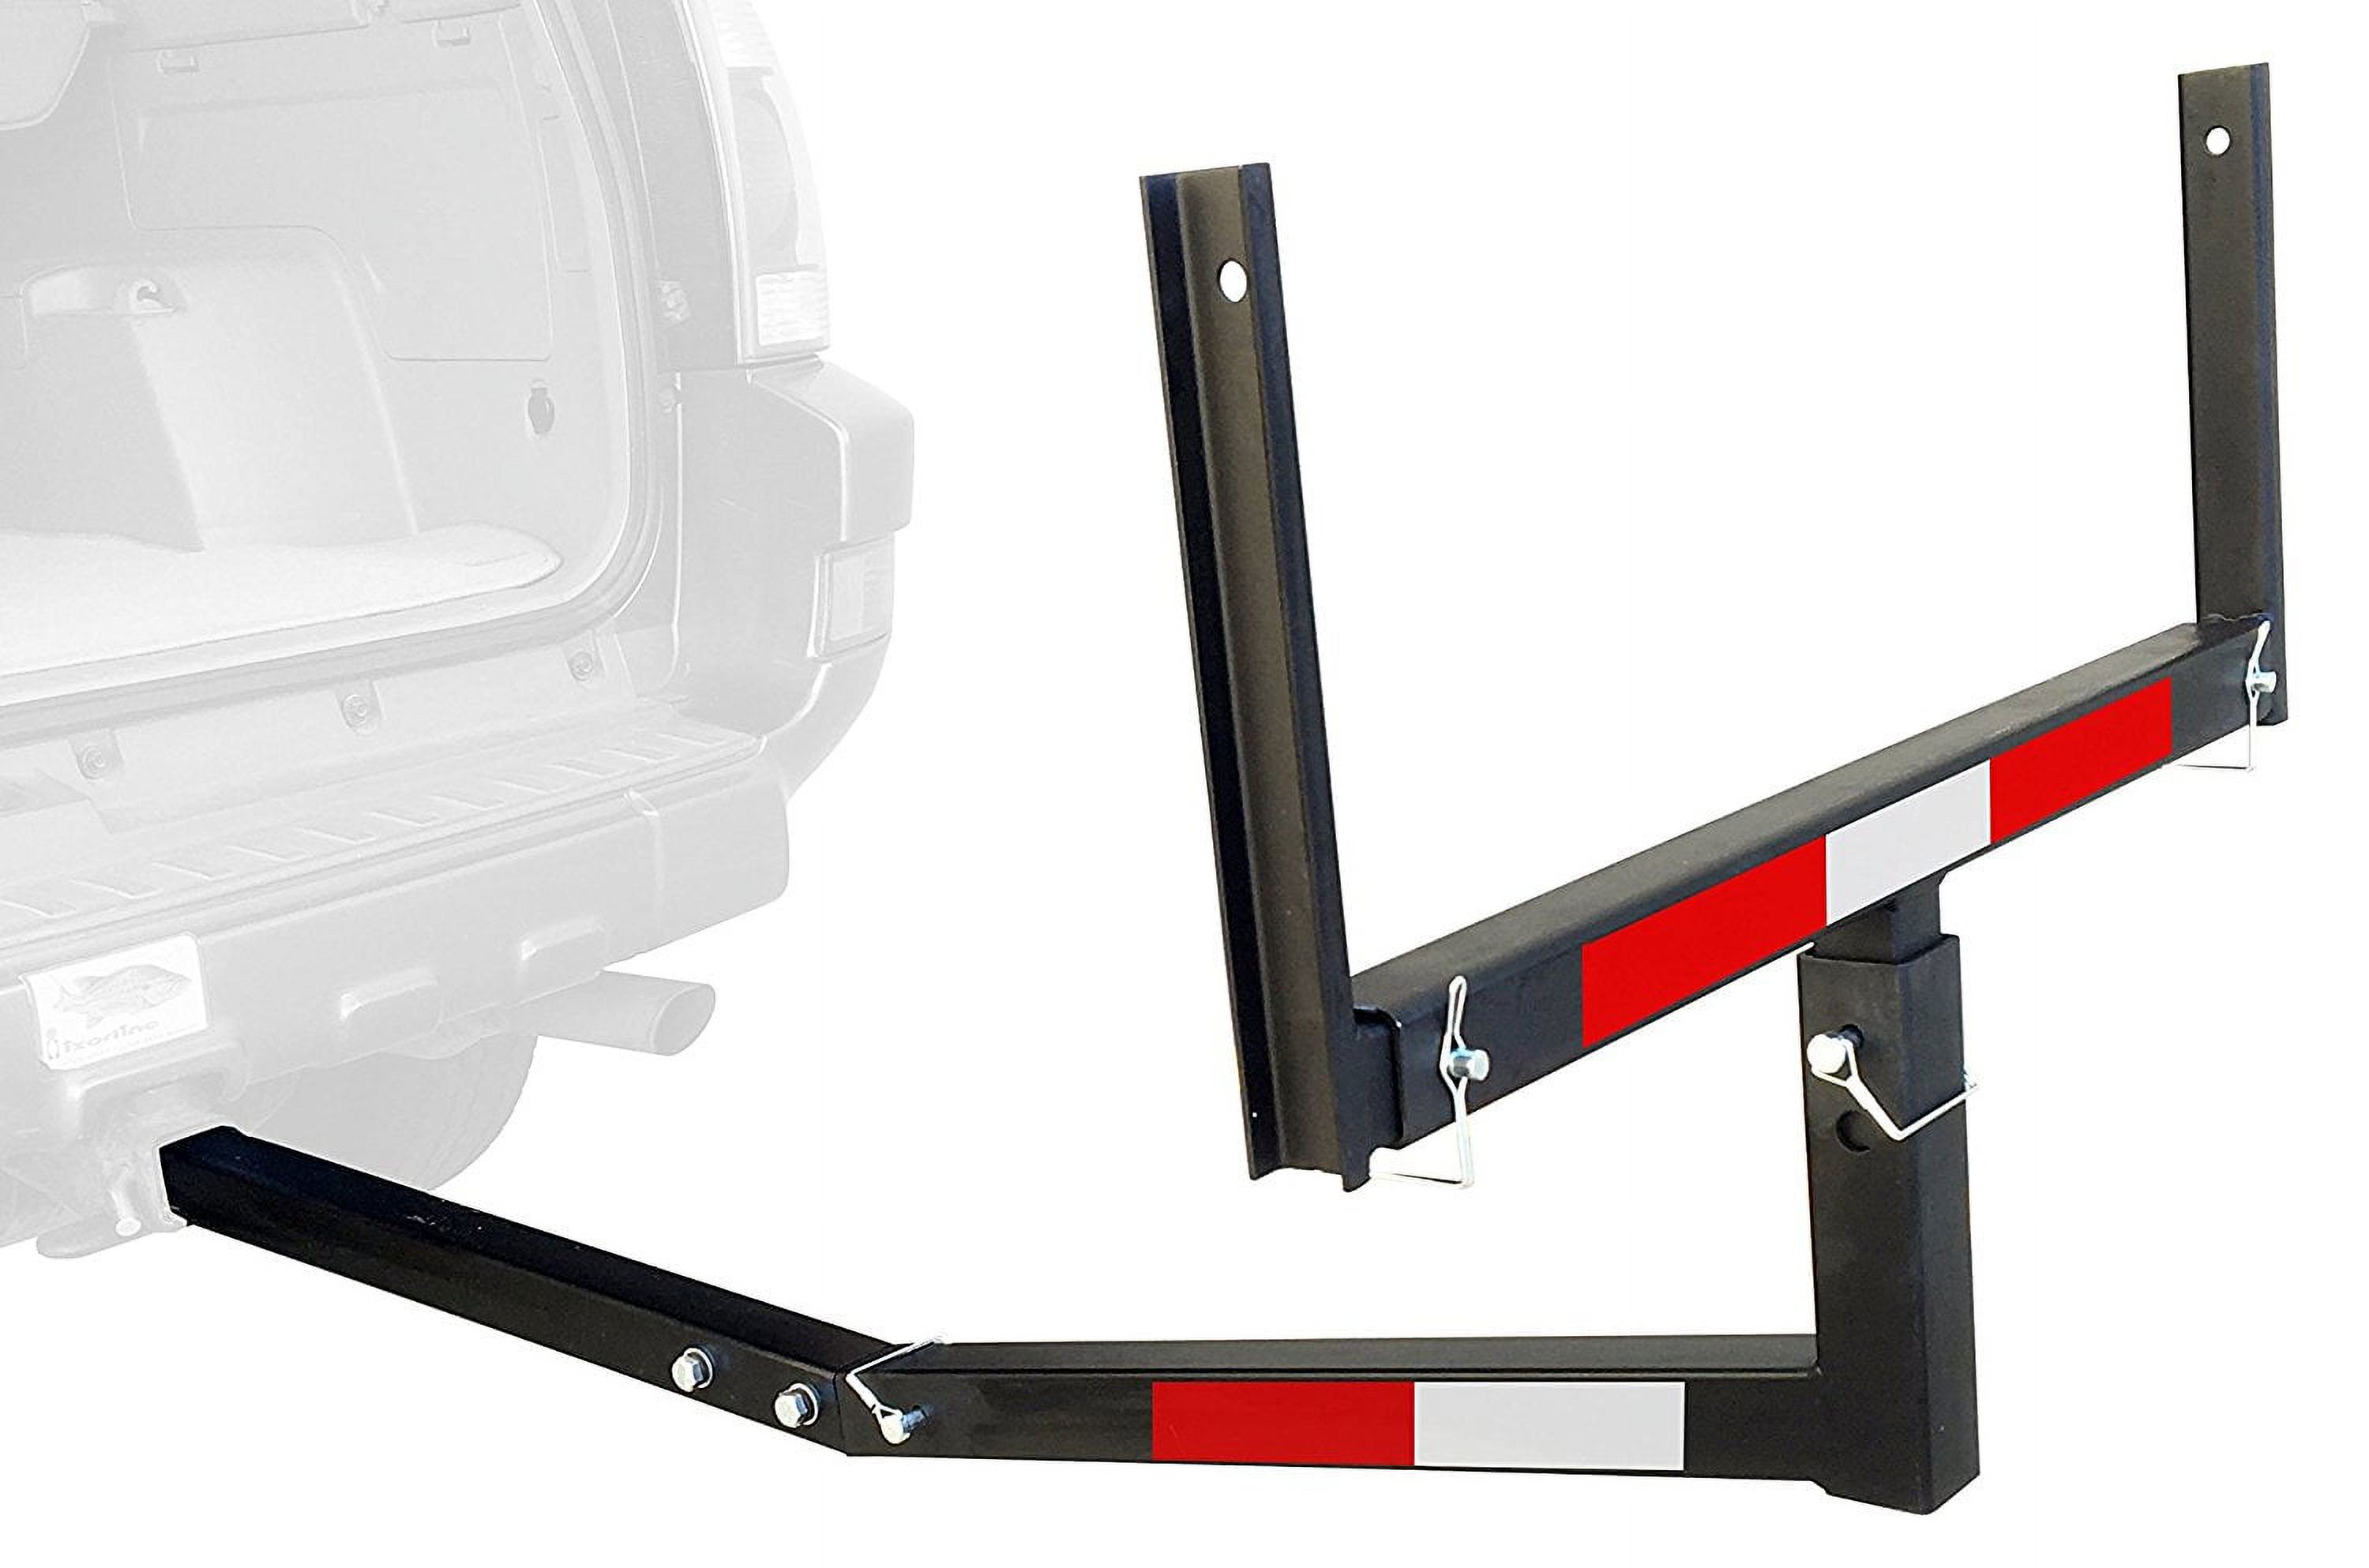 MaxxHaul 70231 Hitch Mount Truck Bed Extender (for Ladder, Rack, Canoe, Kayak, Long Pipes and Lumber) - image 1 of 4